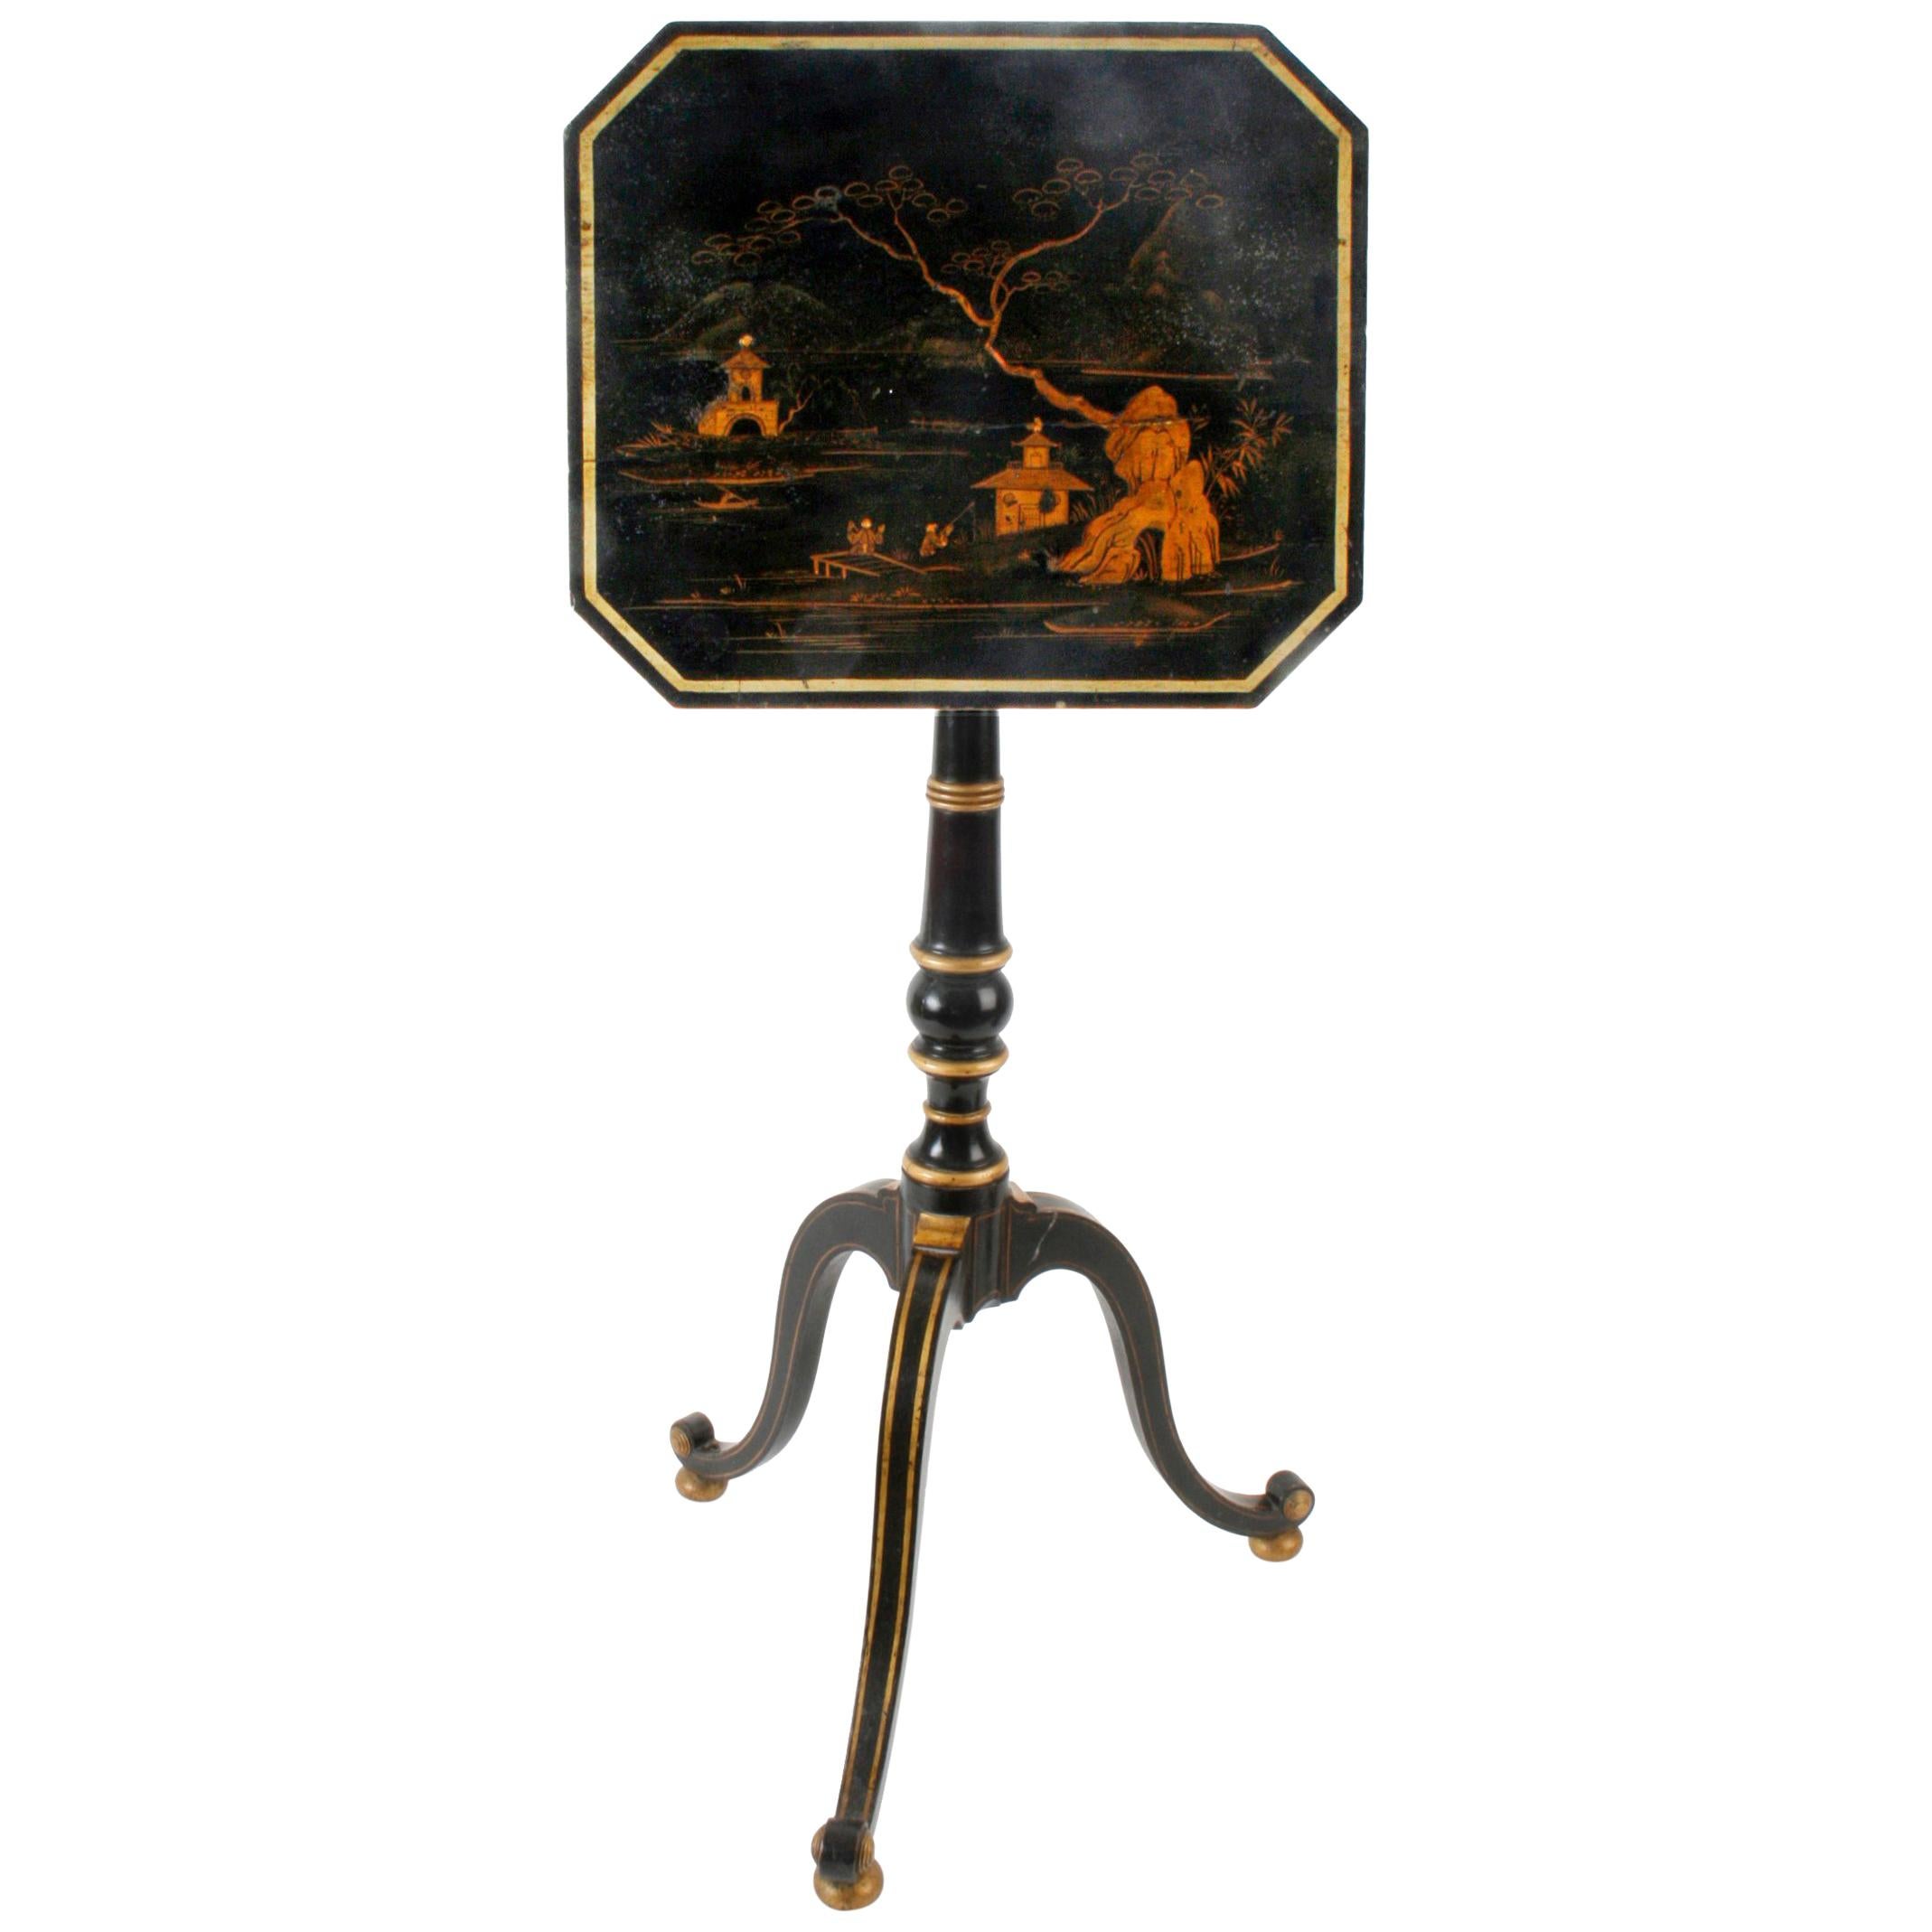 Regency Chinoiserie and Parcel-Gilt Decorated Telescoping Tilt-Top Table